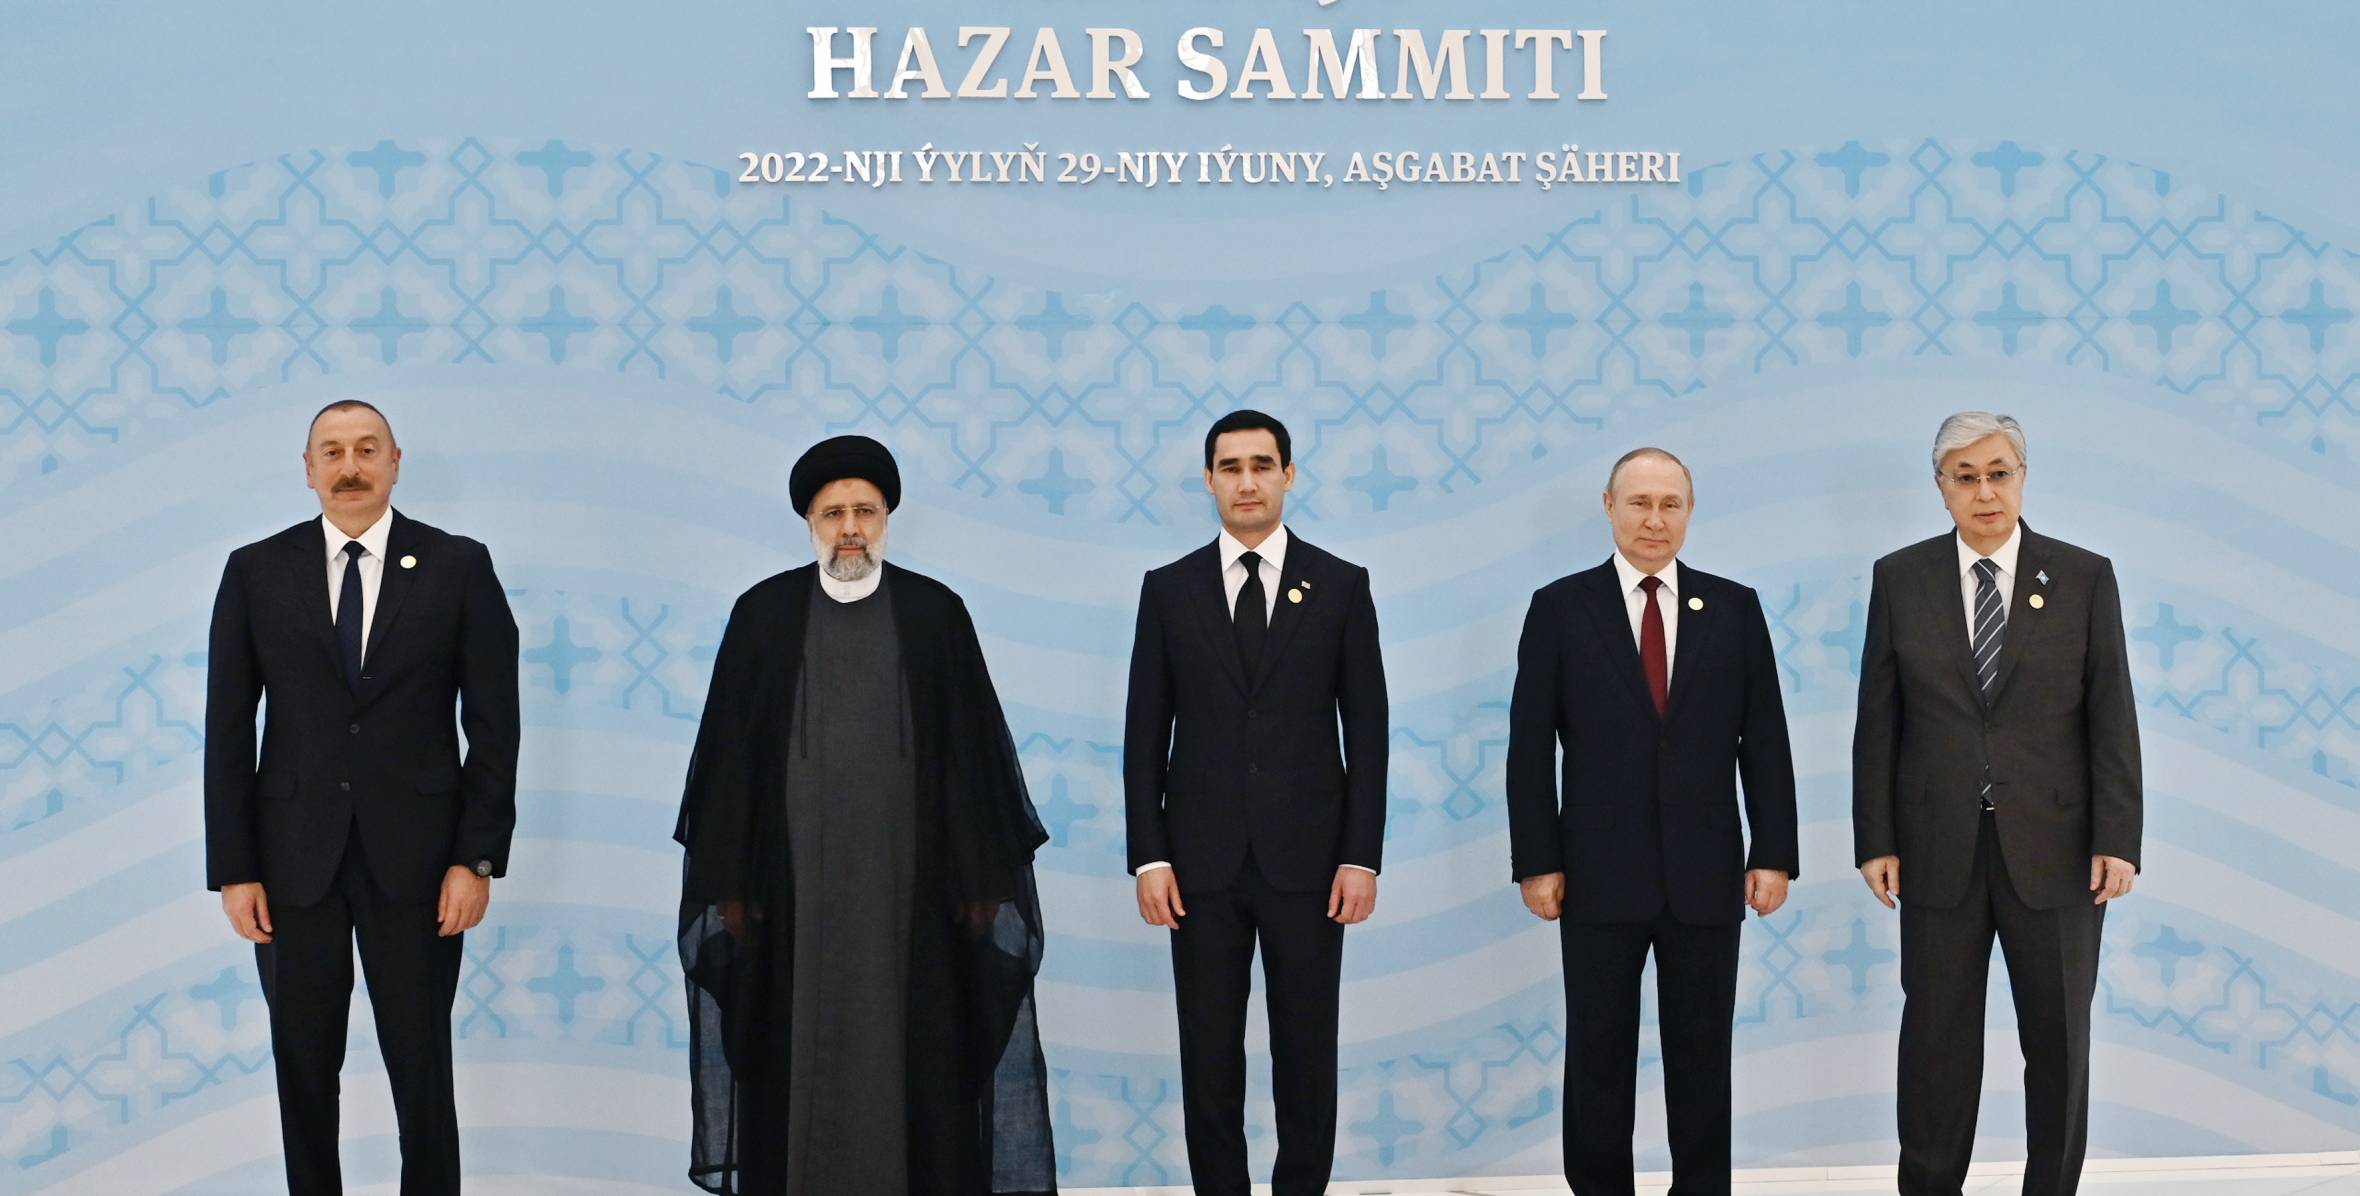 Ilham Aliyev attended the 6th Summit of Heads of State of Caspian littoral states Summit in Ashgabat